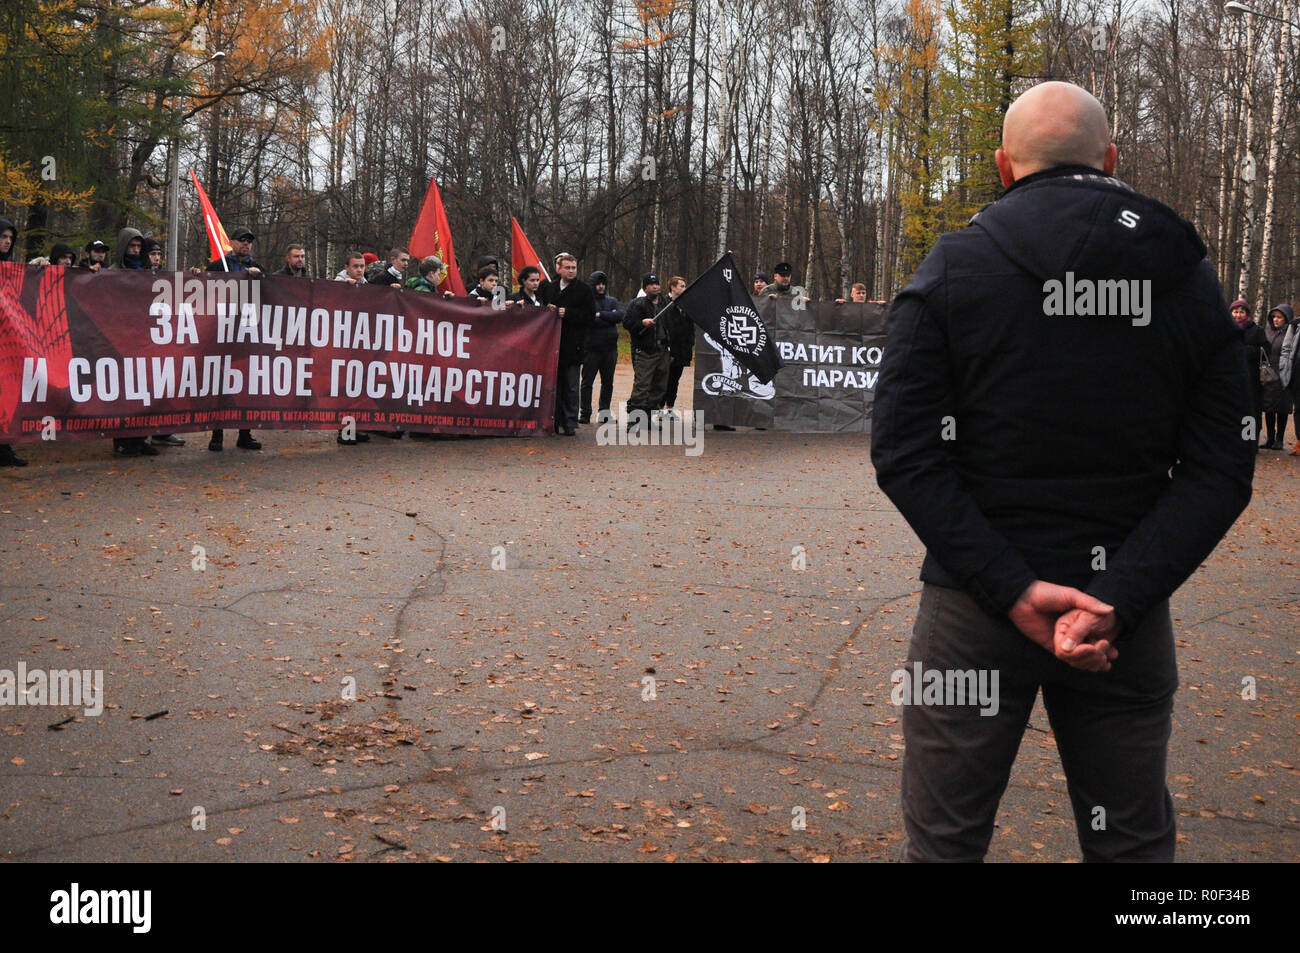 Saint Petersburg, Russia, 4th November, 2018. Russian nationalists hold a protest march and demonstration in Udelniy Park in Saint Petersburg, Russia, to celebrate National Unity Day, chanting oppositional and nationalist slogans. Credit: Aleks Lokhmutov/Alamy Live News Stock Photo